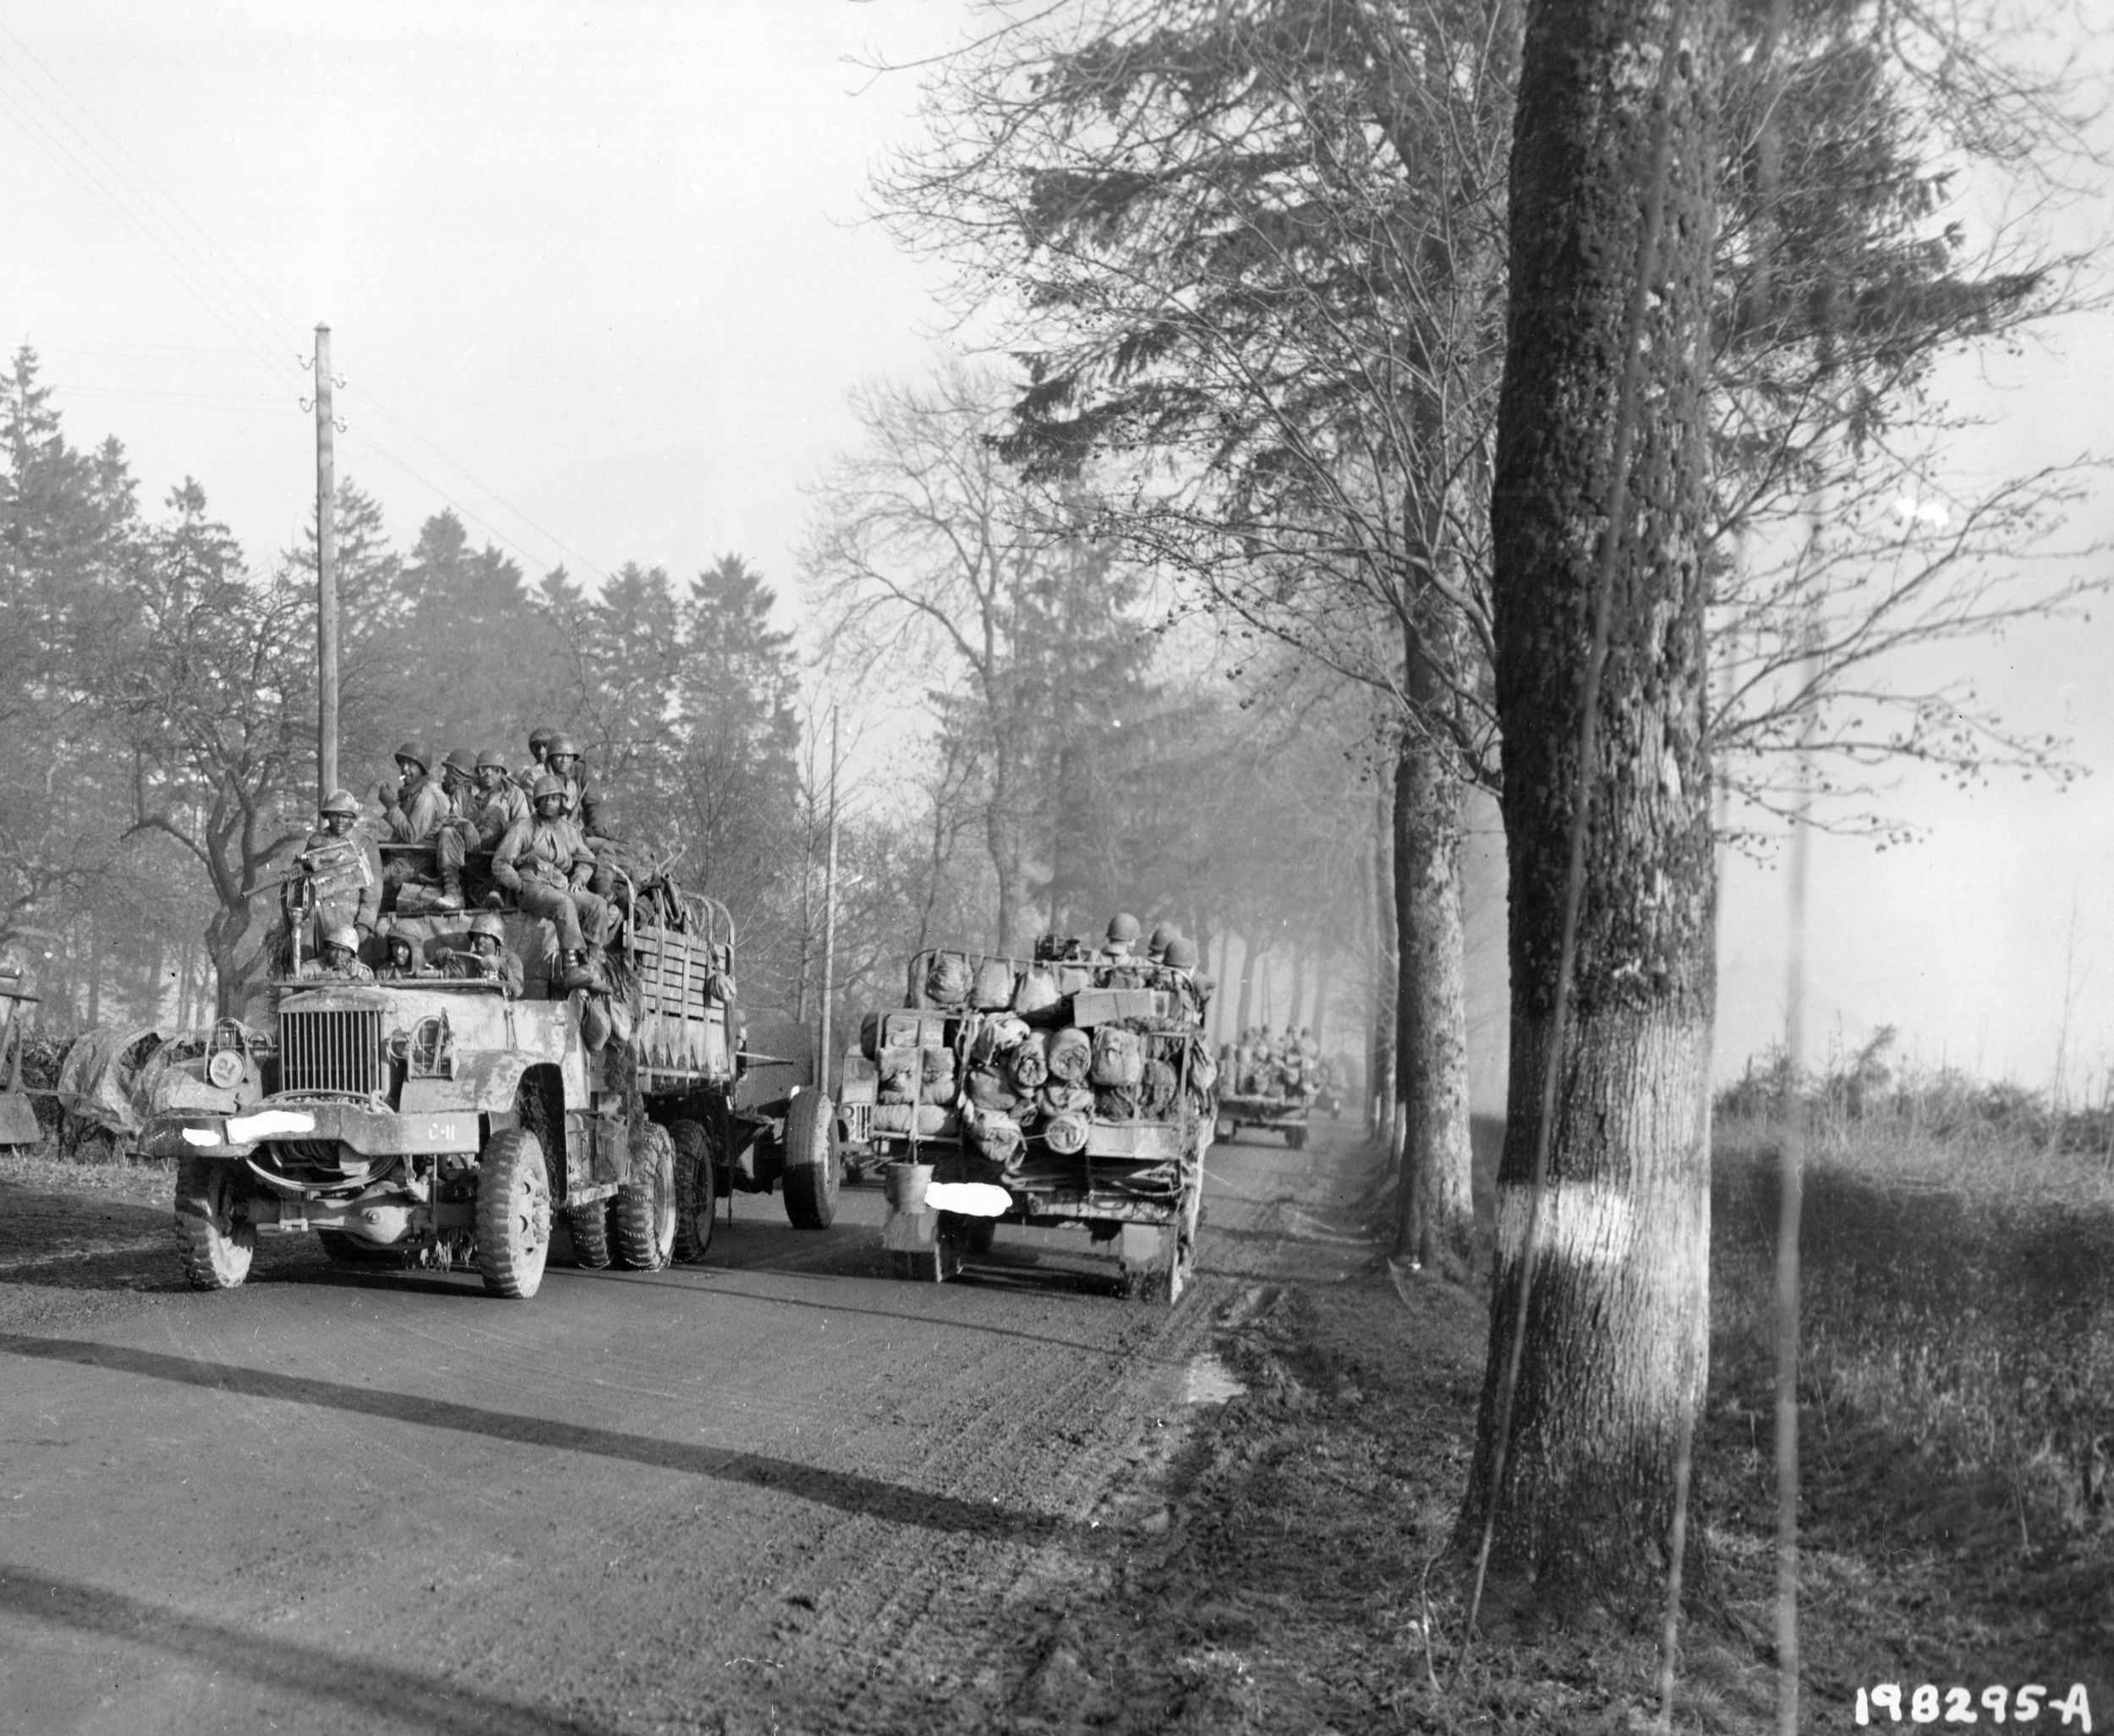 African-American soldiers of a field artillery unit, one of four engaged in support of the defenses at Bastogne, relocate to a new position at left as another truck carries troops and equipment forward. This photo was taken on December 20, 1944.